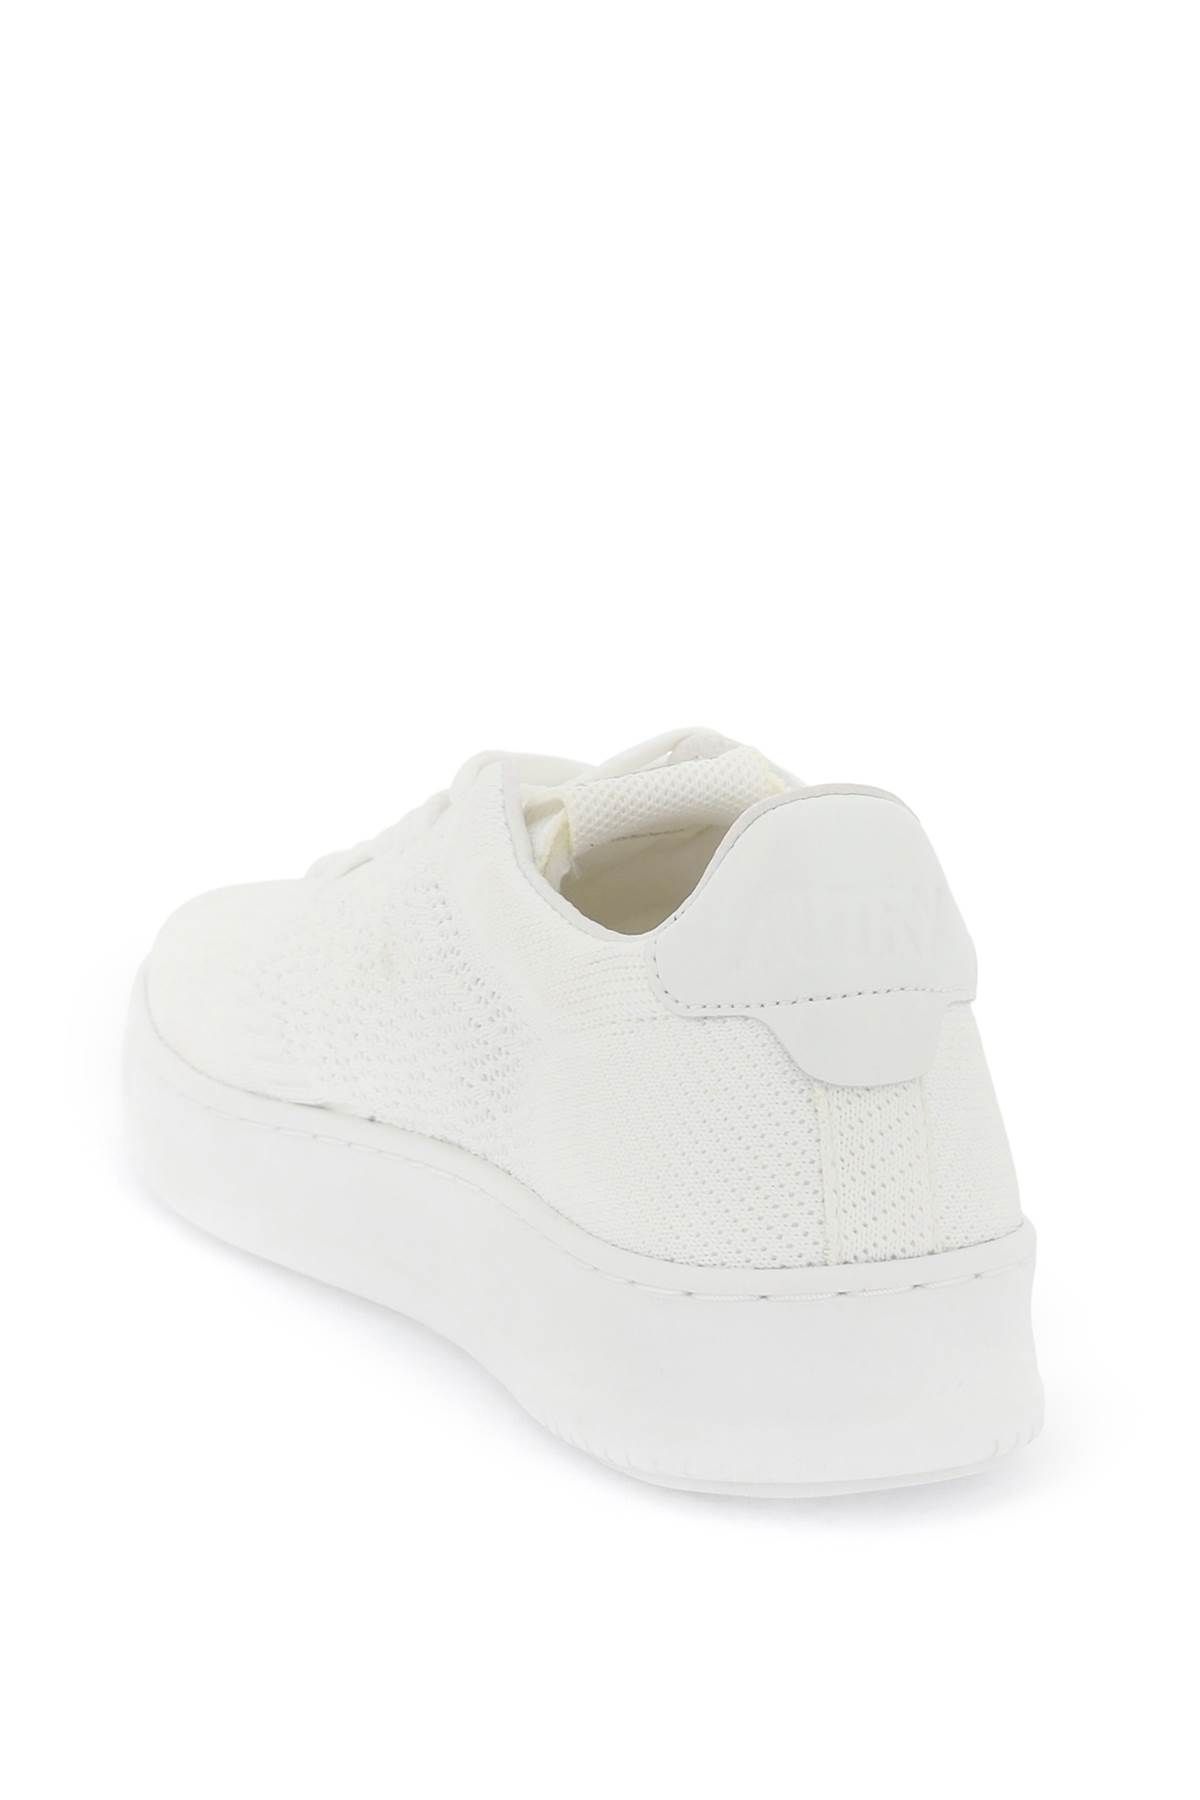 Shop Autry Low Easeknit Medalist In White